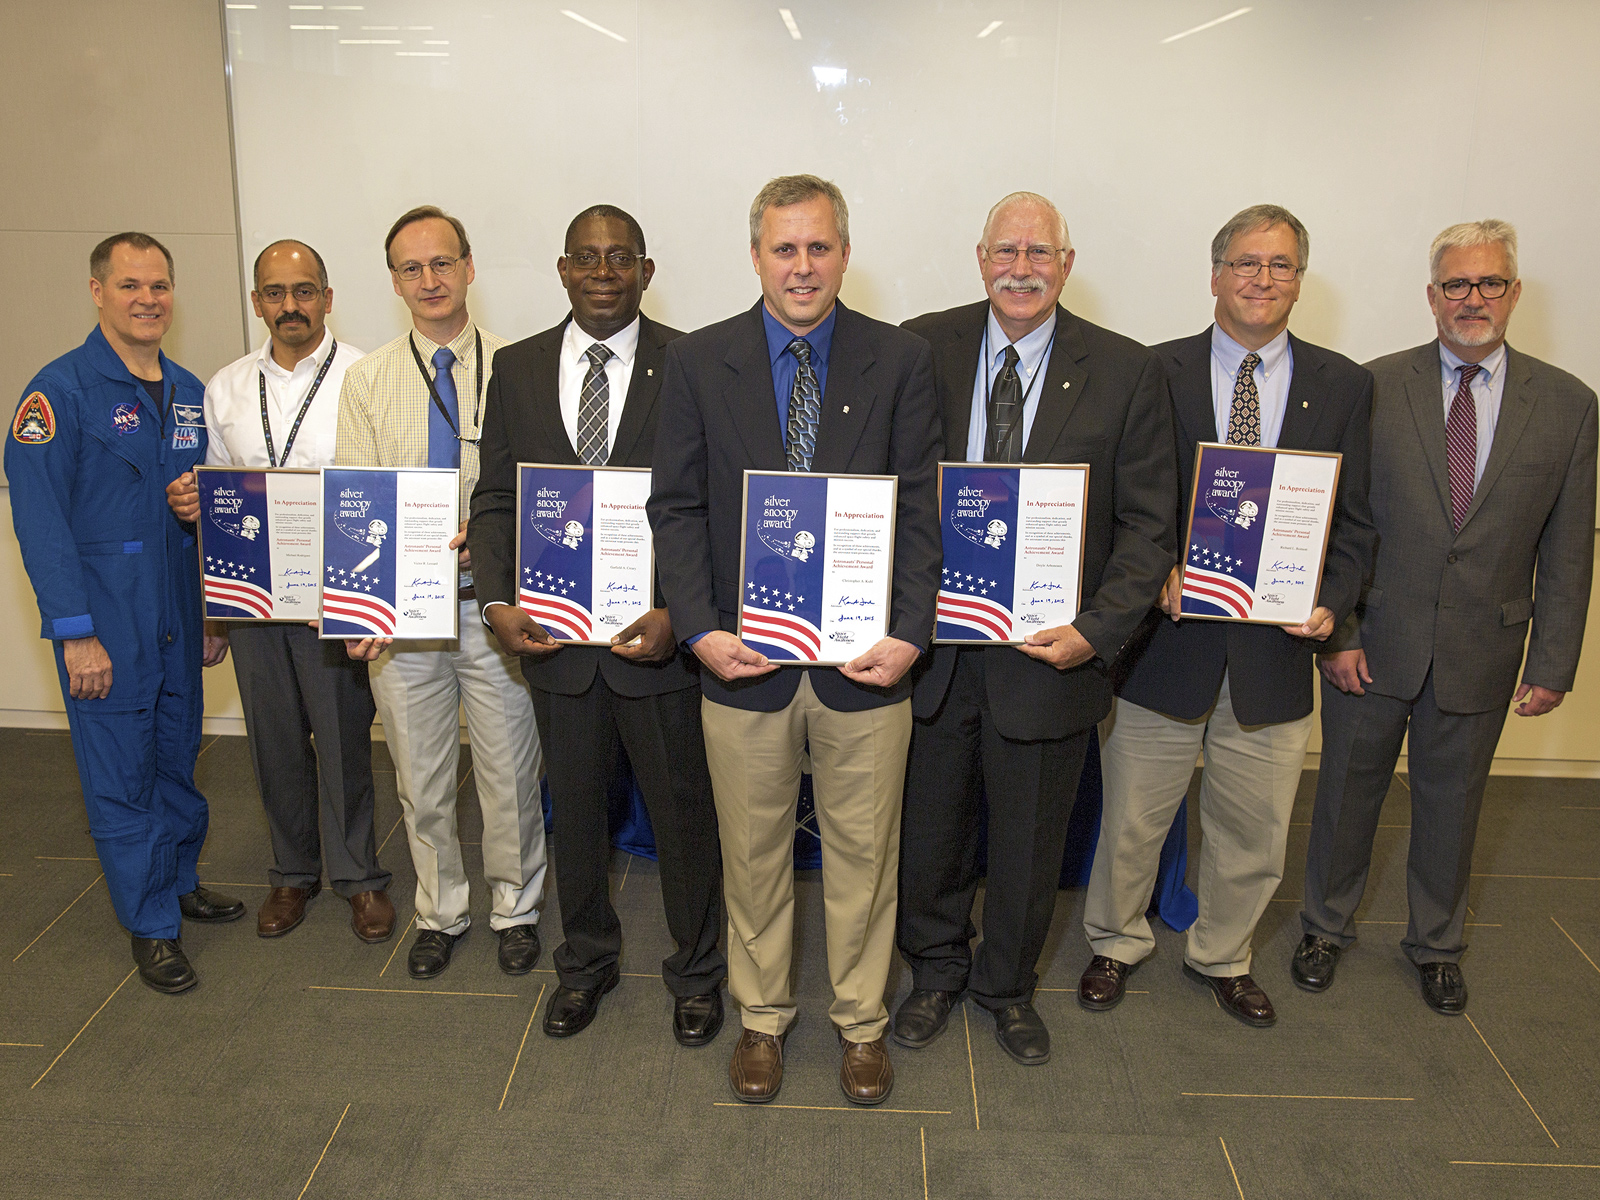 Four NASA Langley employees were recognized by NASA's astronaut corps in 2015